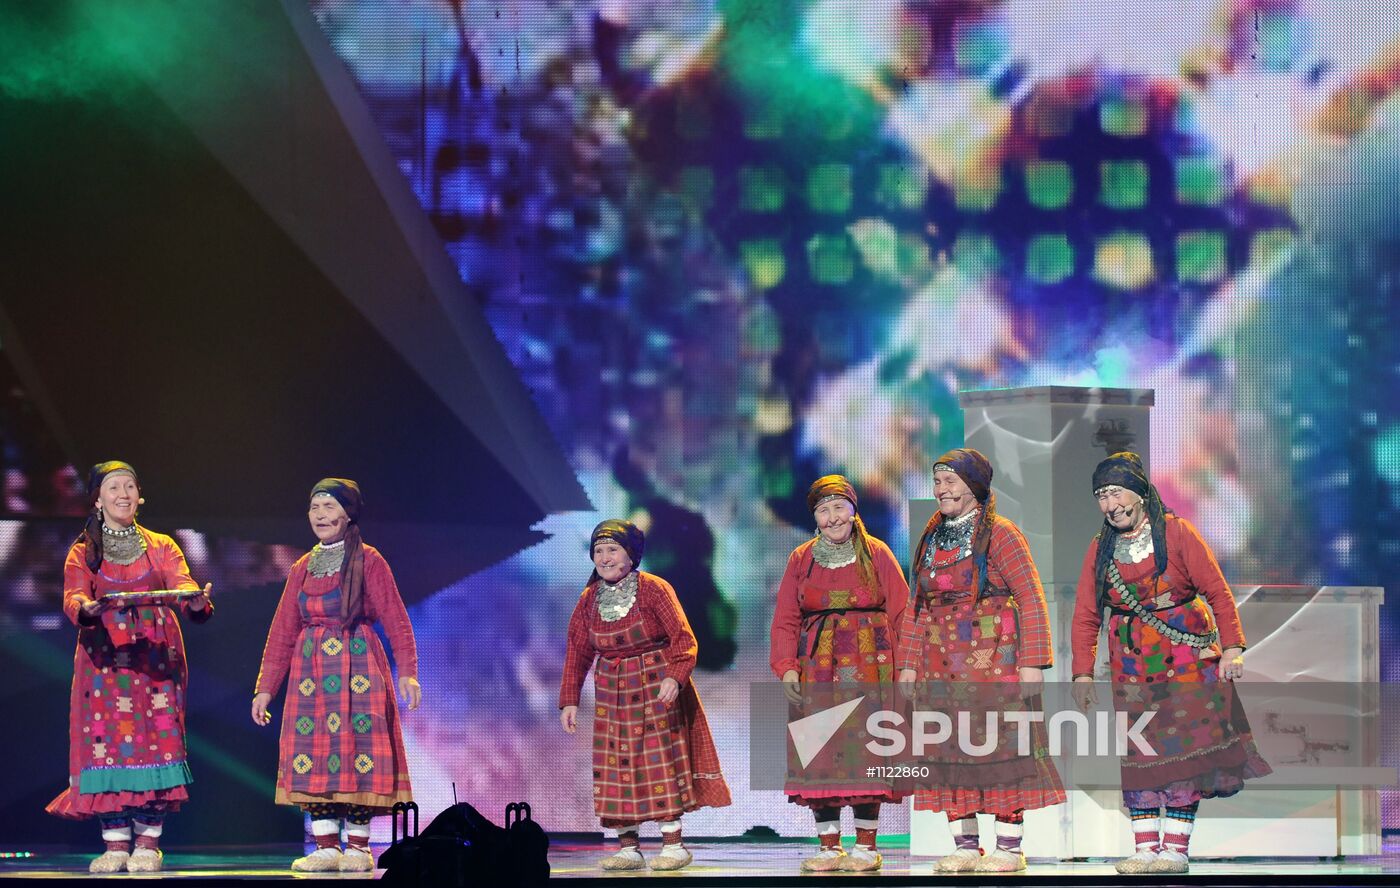 Buranovo Grannies during rehearsal ahead of Eurovision contest